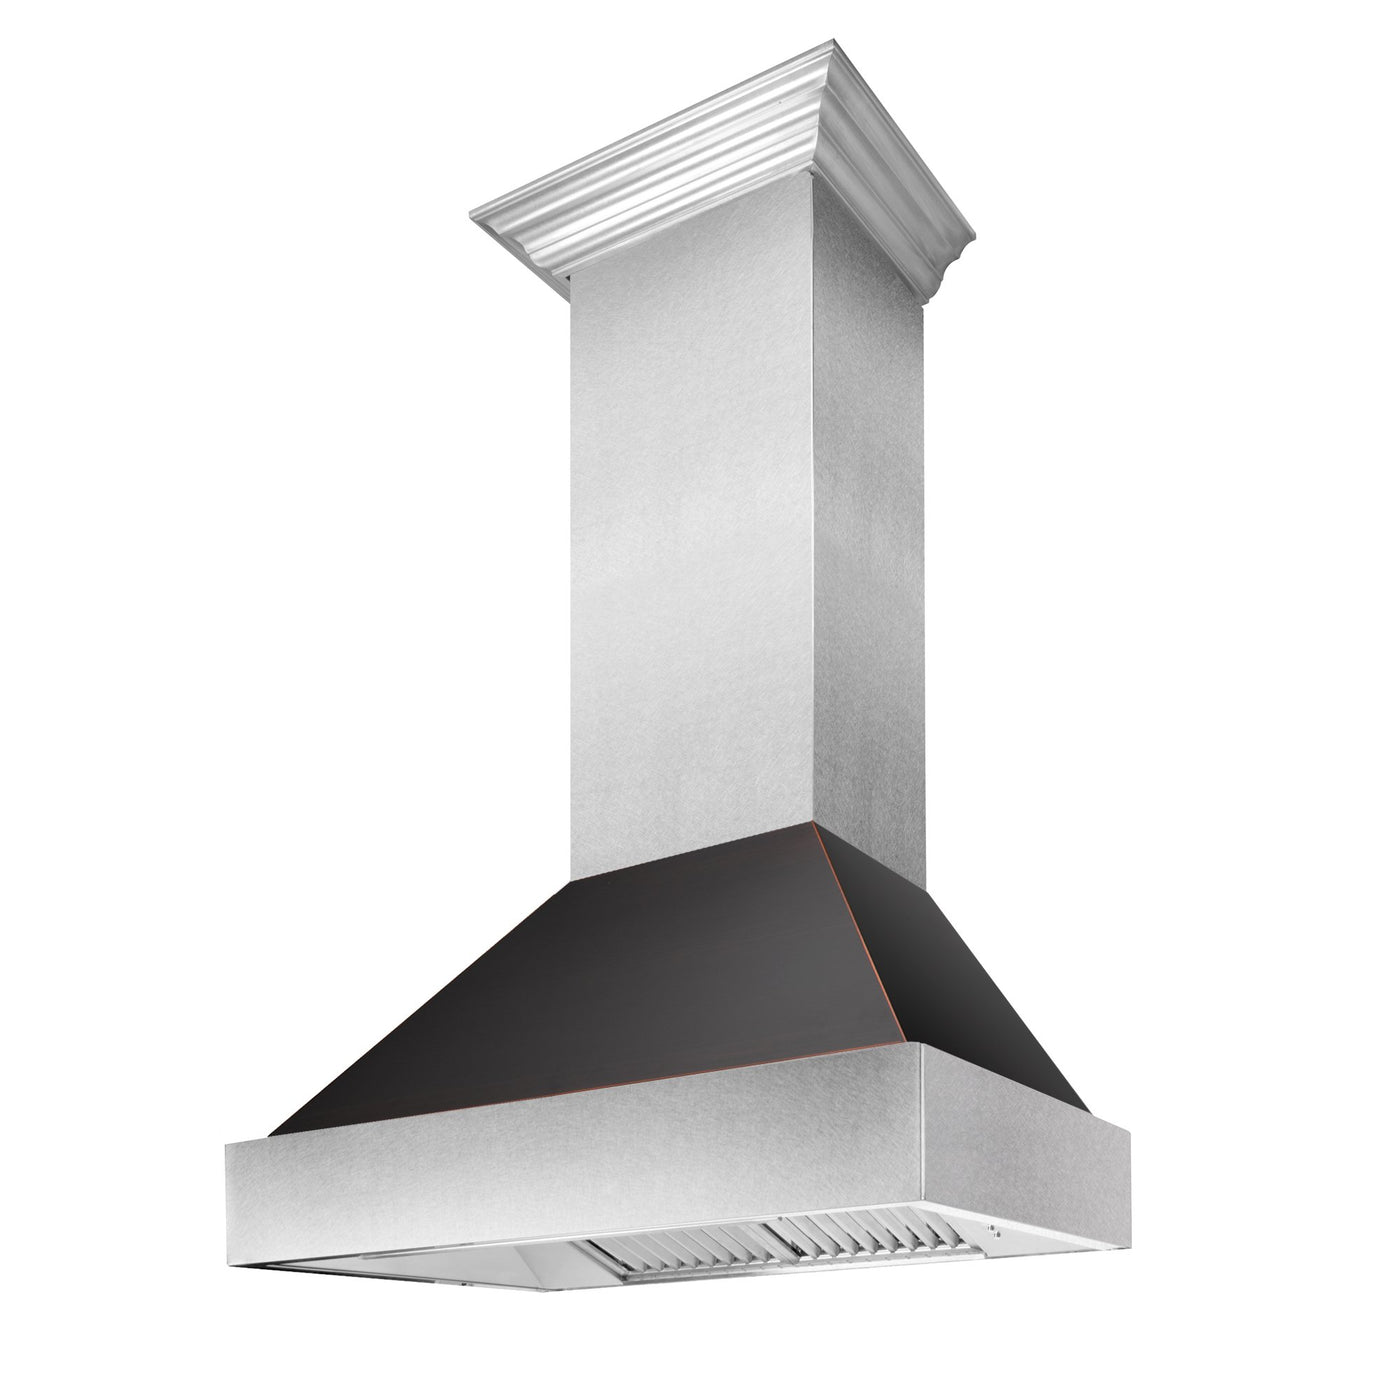 ZLINE Ducted DuraSnow® Stainless Steel Range Hood with Oil Rubbed Bronze Shell (8654ORB)